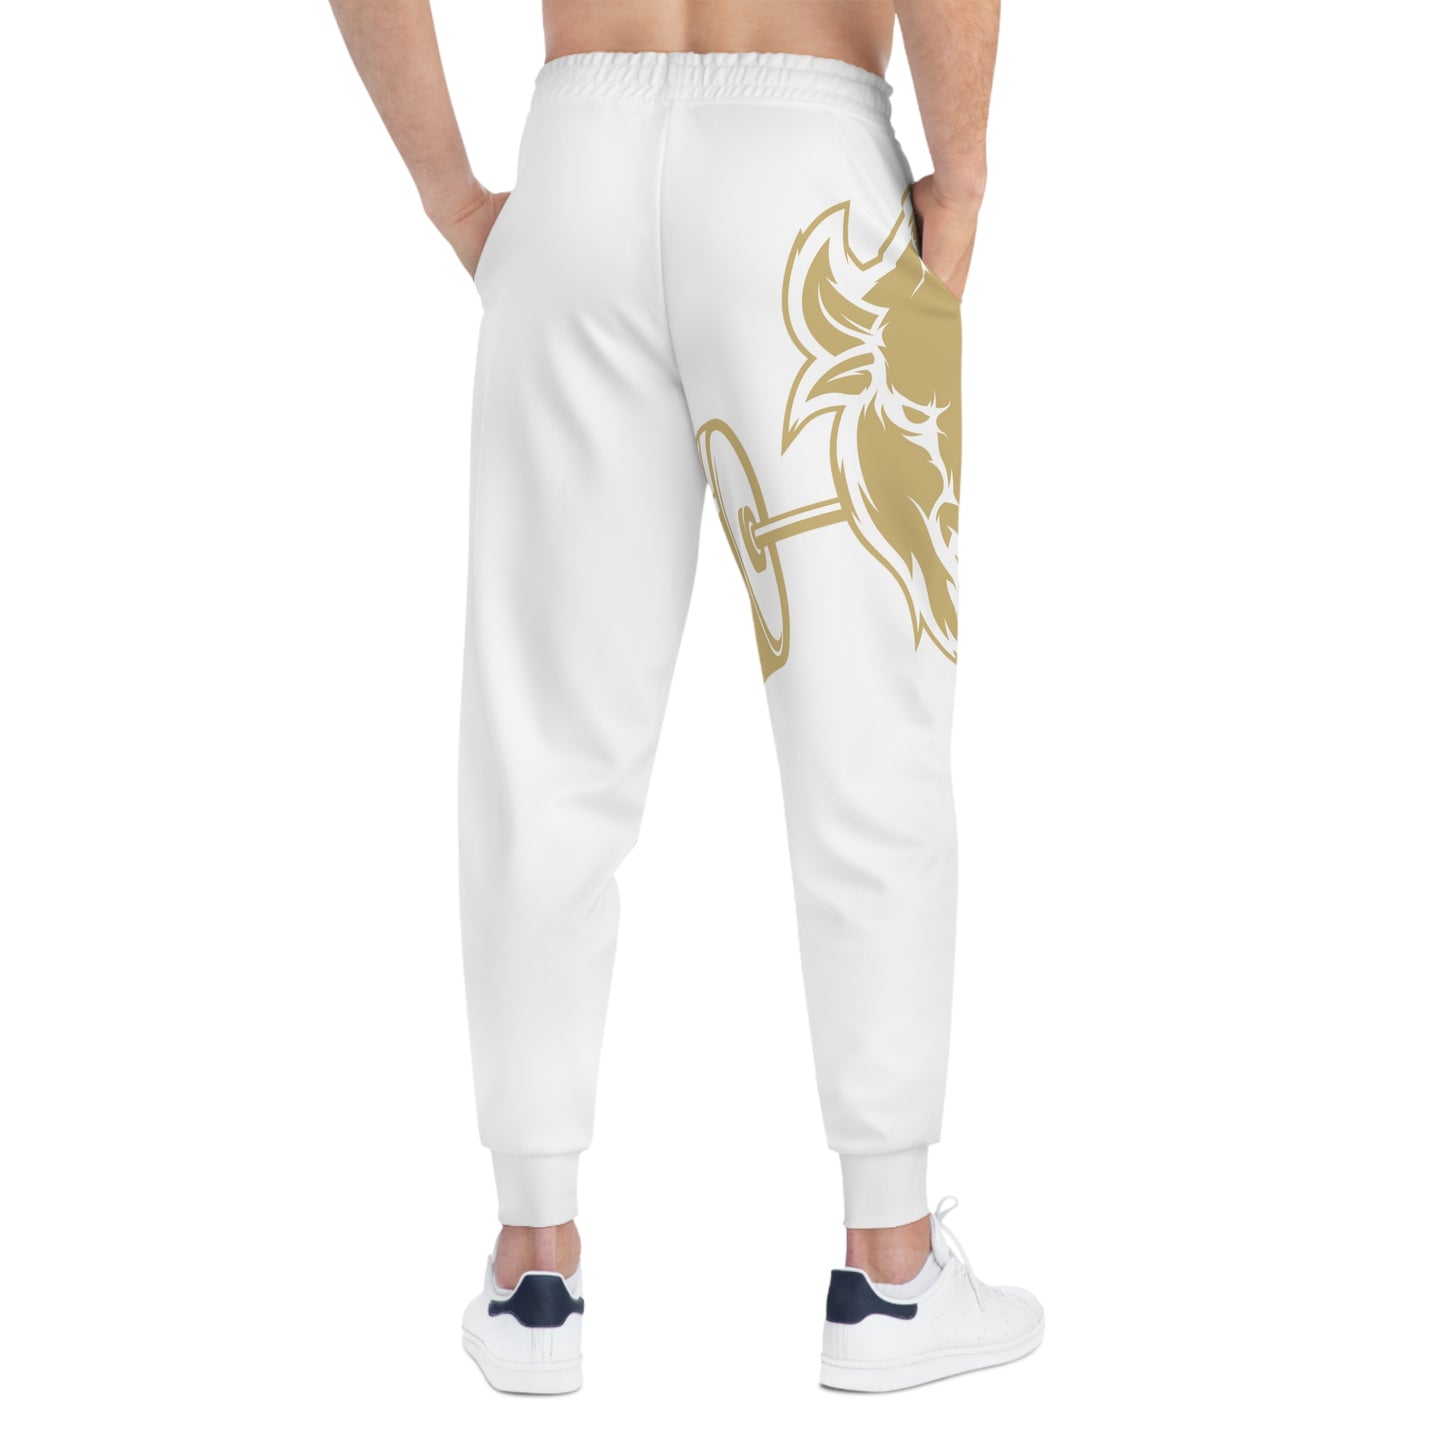 CU Barbell Bodybuilding Warm-Up Joggers (White)